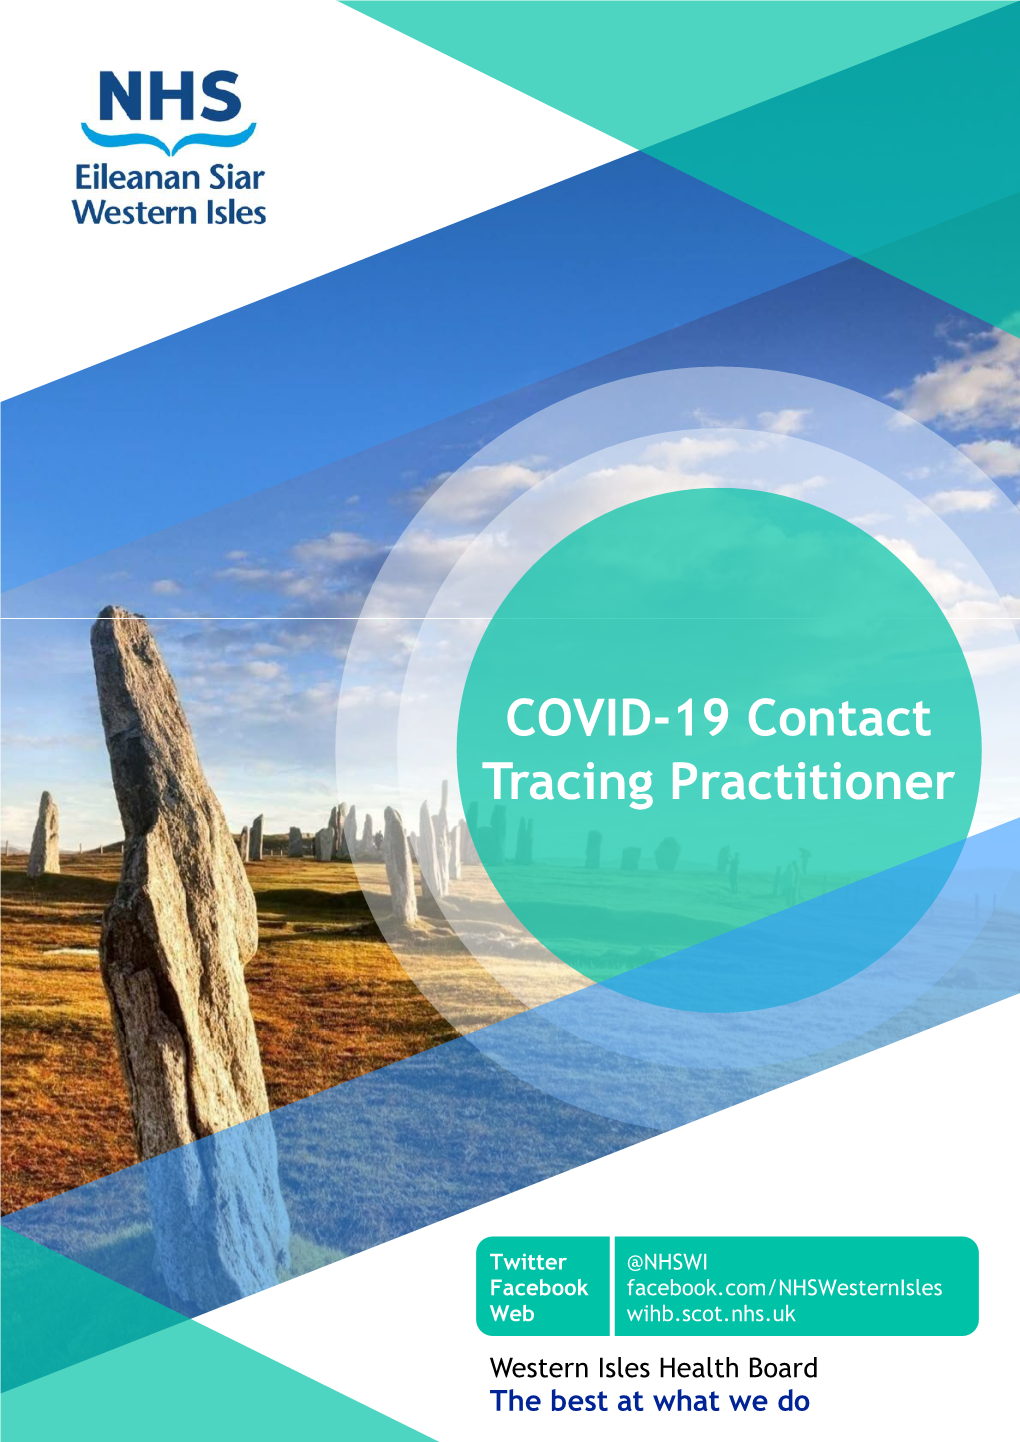 NHS Western Isles COVID 19 Contact Tracing Practitioner